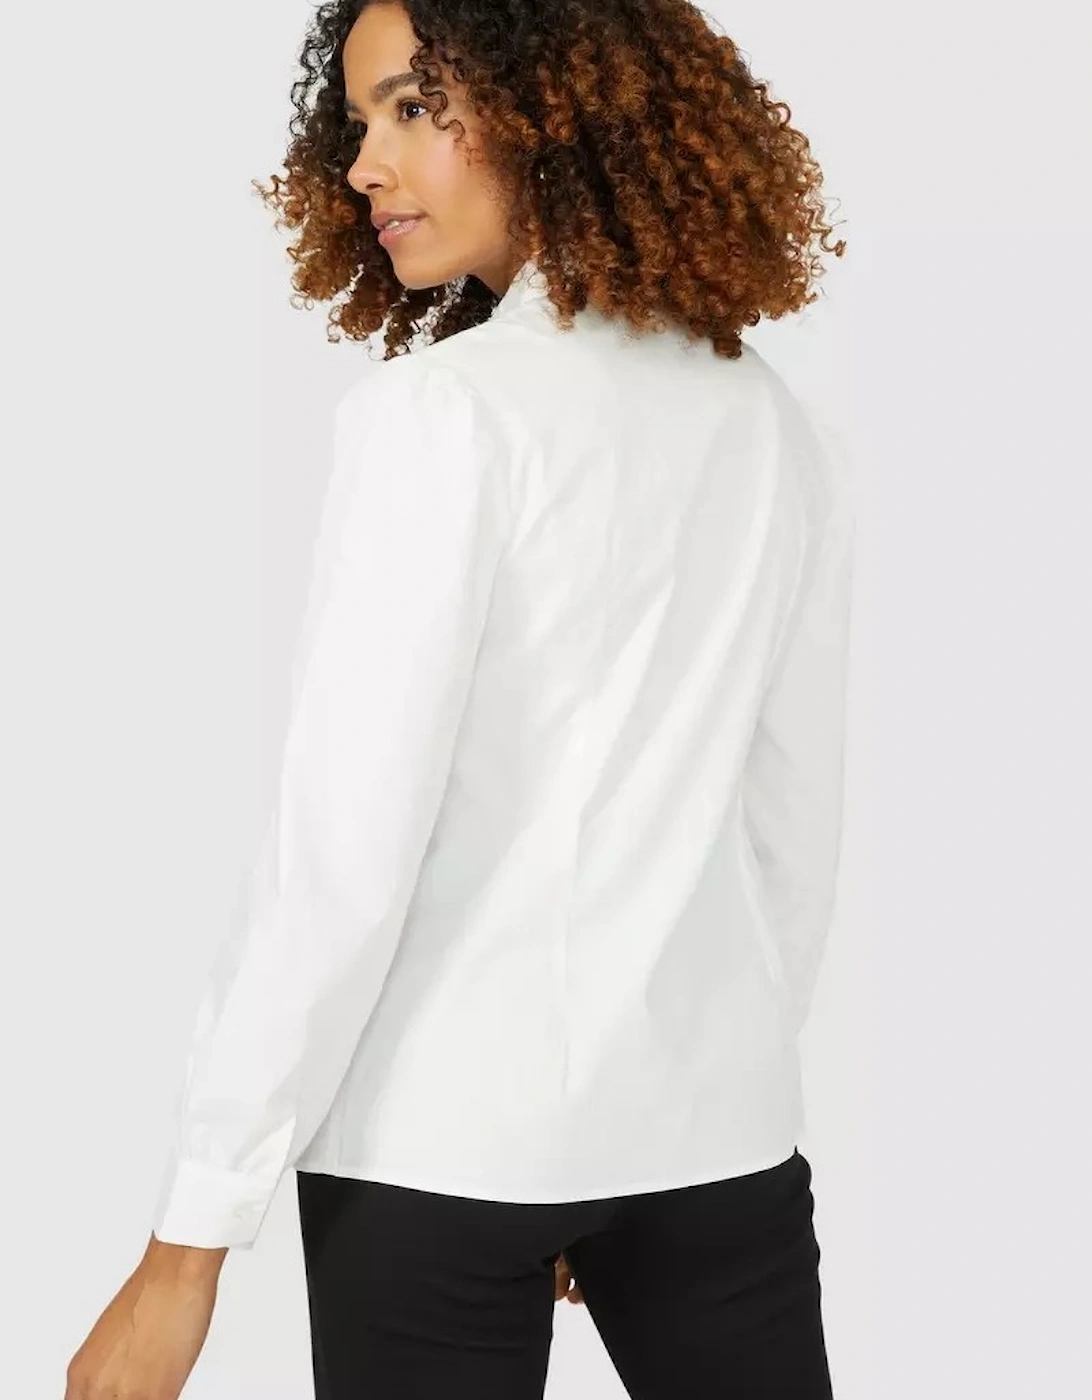 Womens/Ladies Cotton Fitted Shirt